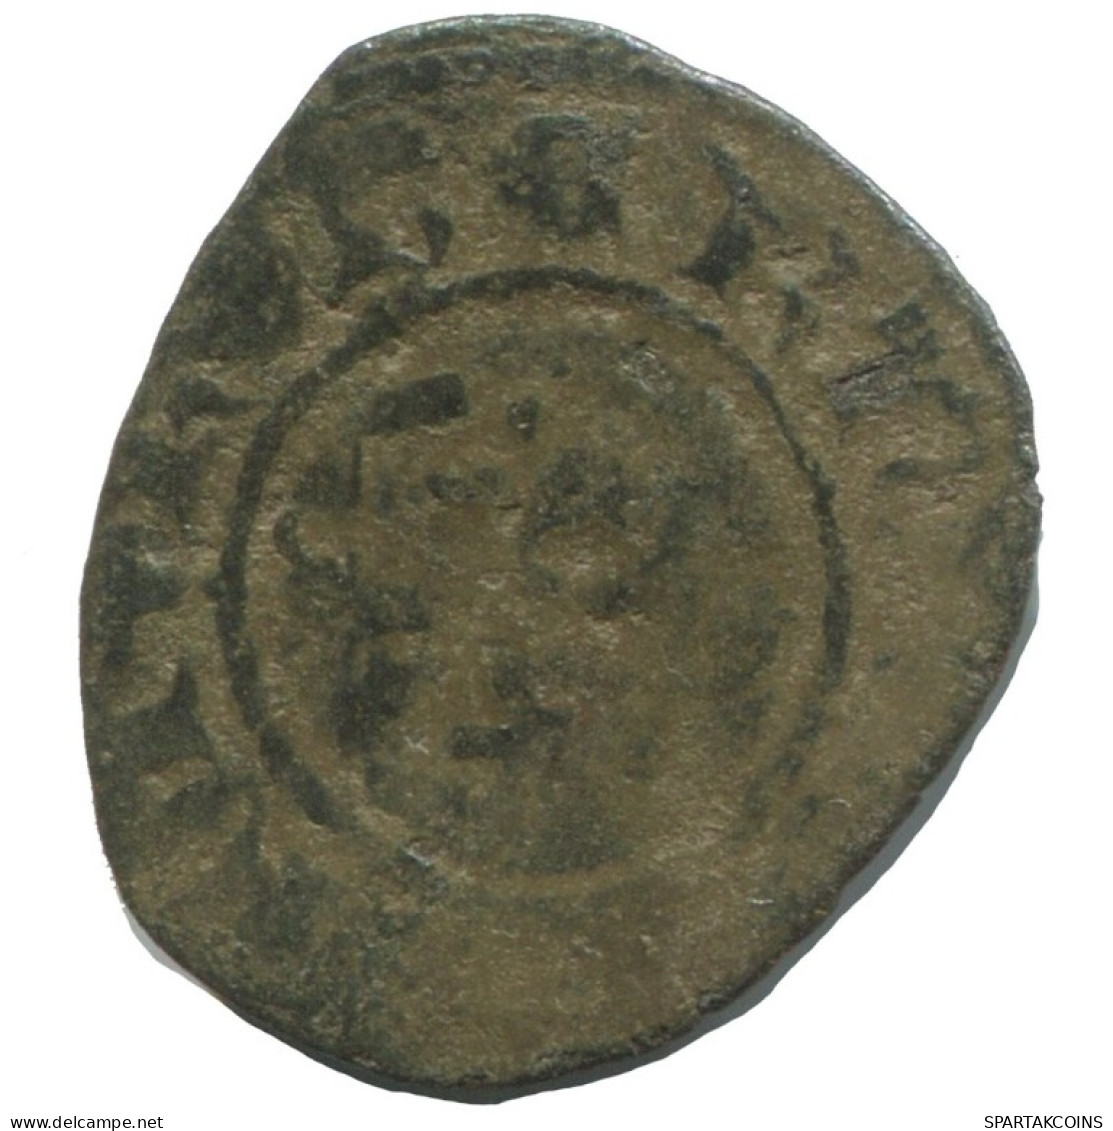 CRUSADER CROSS Authentic Original MEDIEVAL EUROPEAN Coin 2.1g/18mm #AC181.8.E.A - Other - Europe